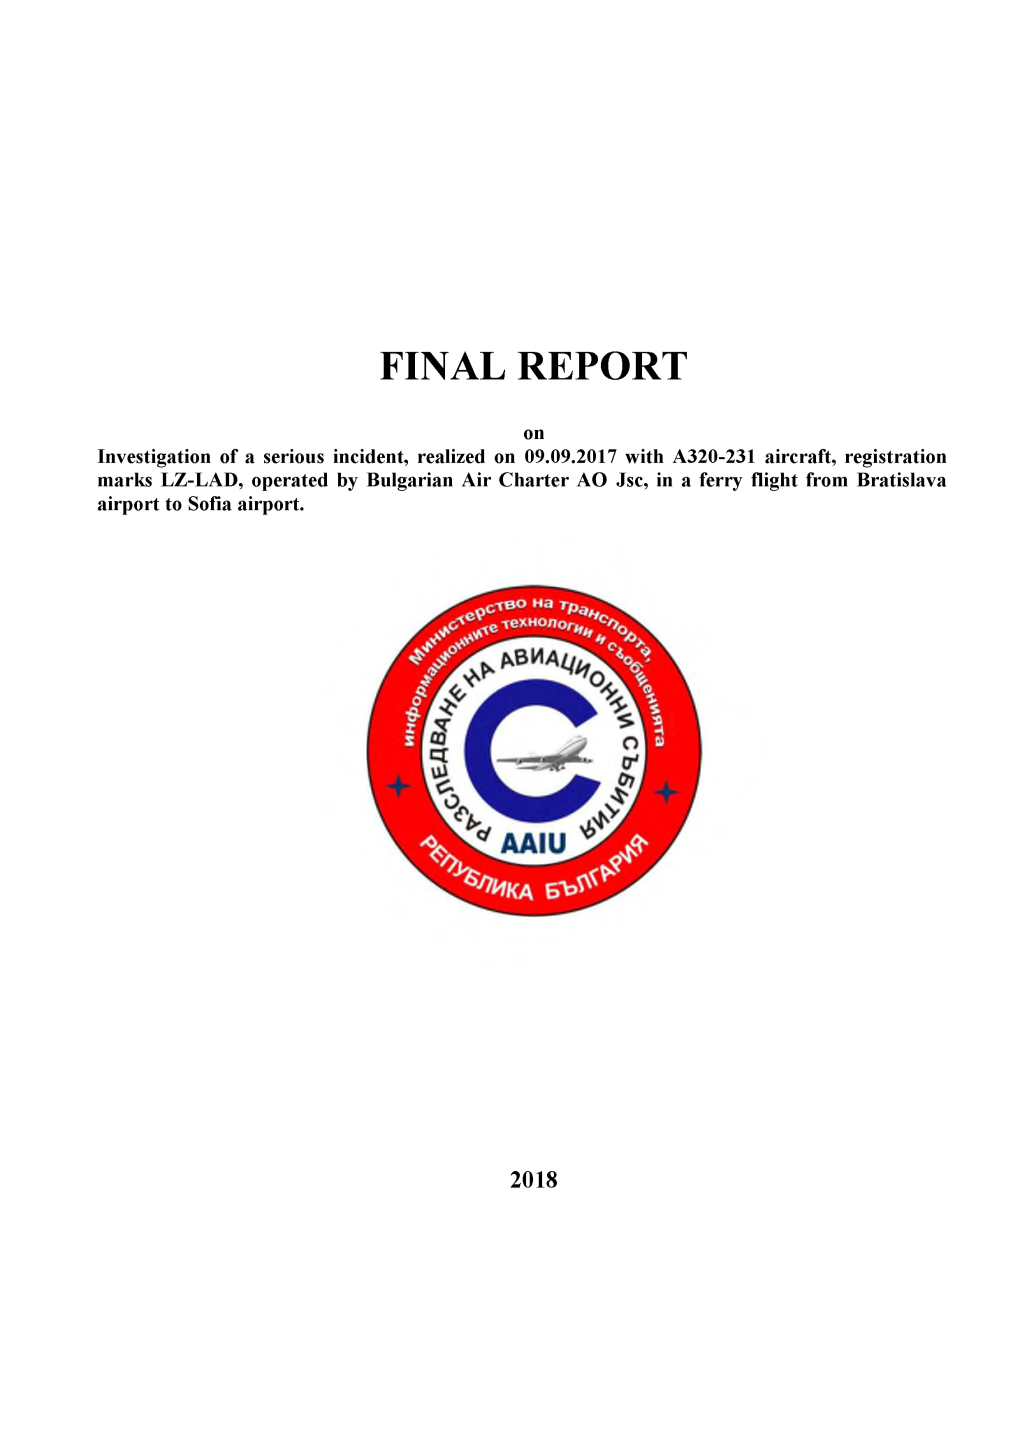 FINAL REPORT on Investigation of a Serious Incident, Realized on 09.09